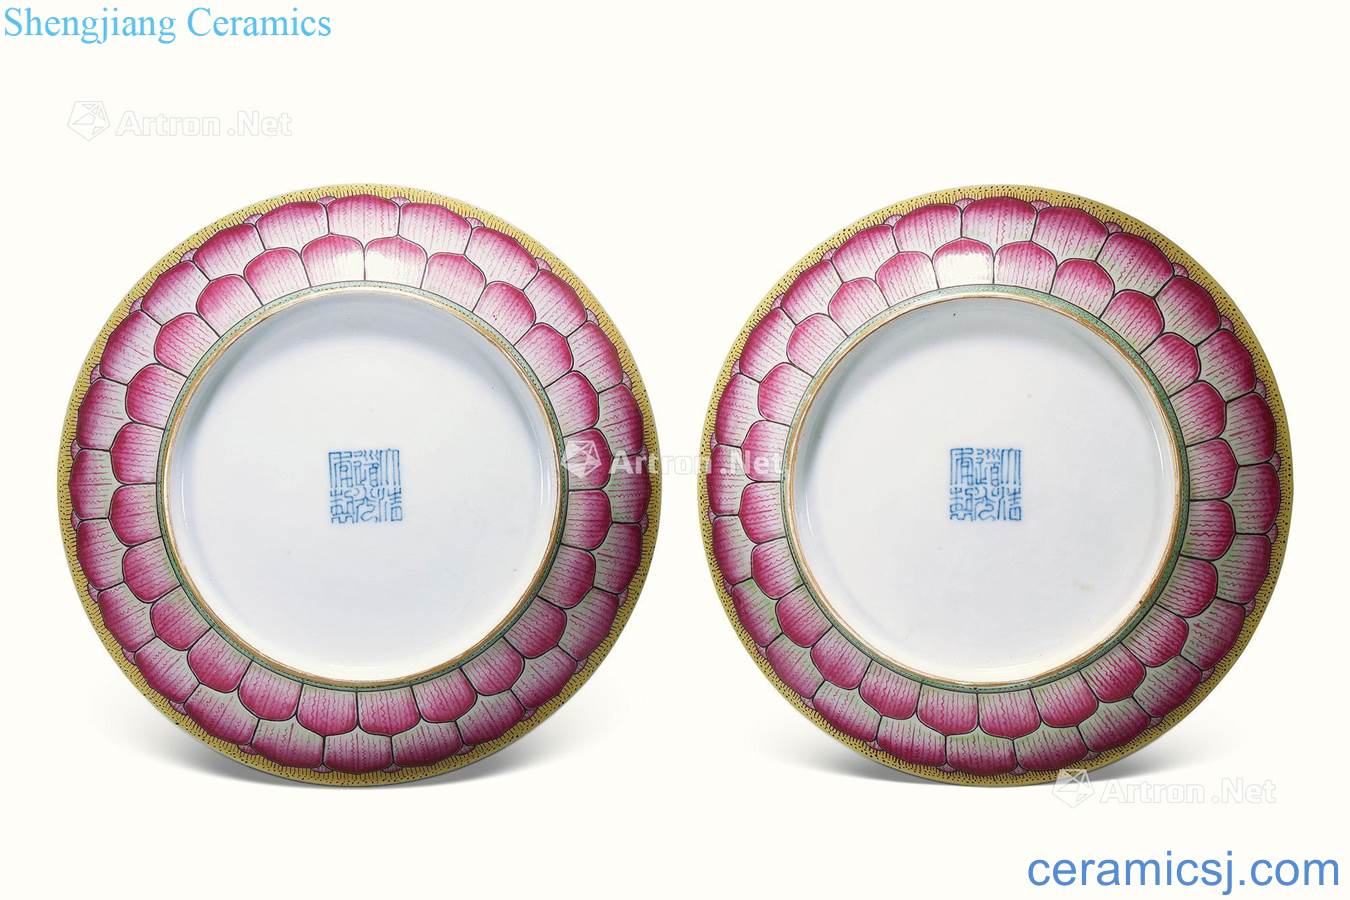 Clear light pastel lotus-shaped plate (a)